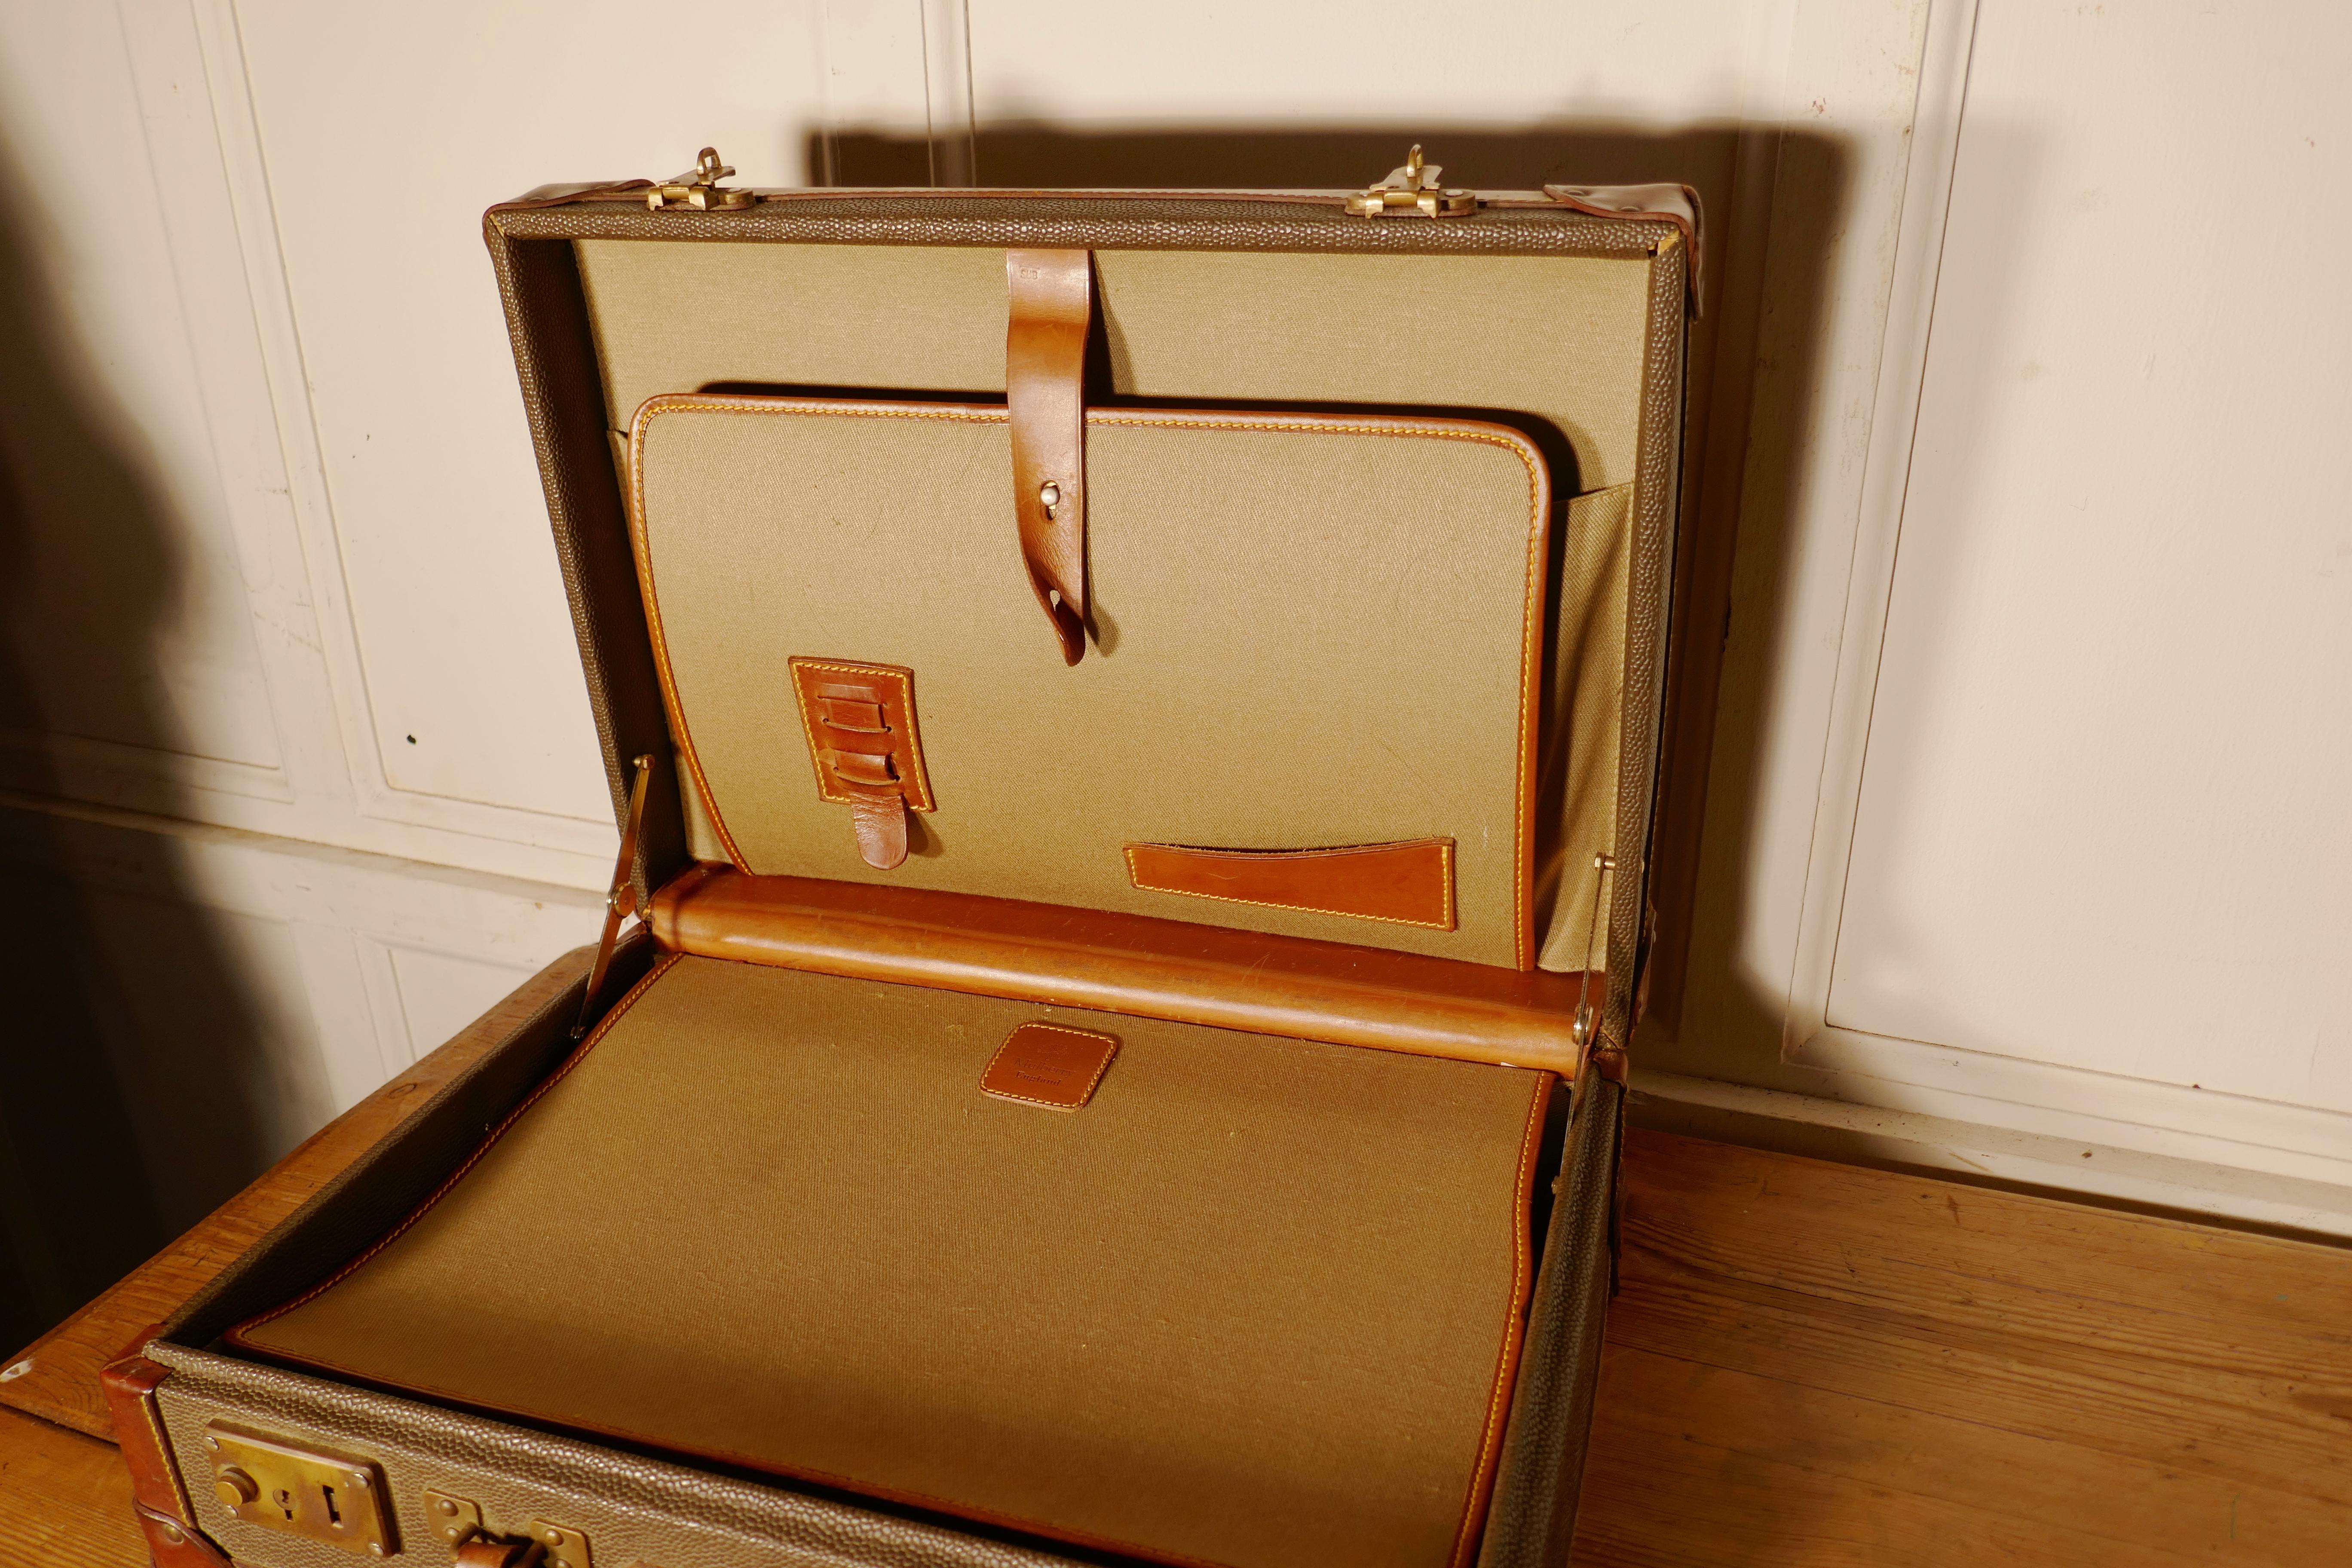 Vintage mulberry Scotch-grain attach case, briefcase or small suitcase

A wonderful vintage piece from the Scotch-grain collection by Mulberry, case is a Large Briefcase, plenty of room to use as an overnight case. Made in Leather with brass